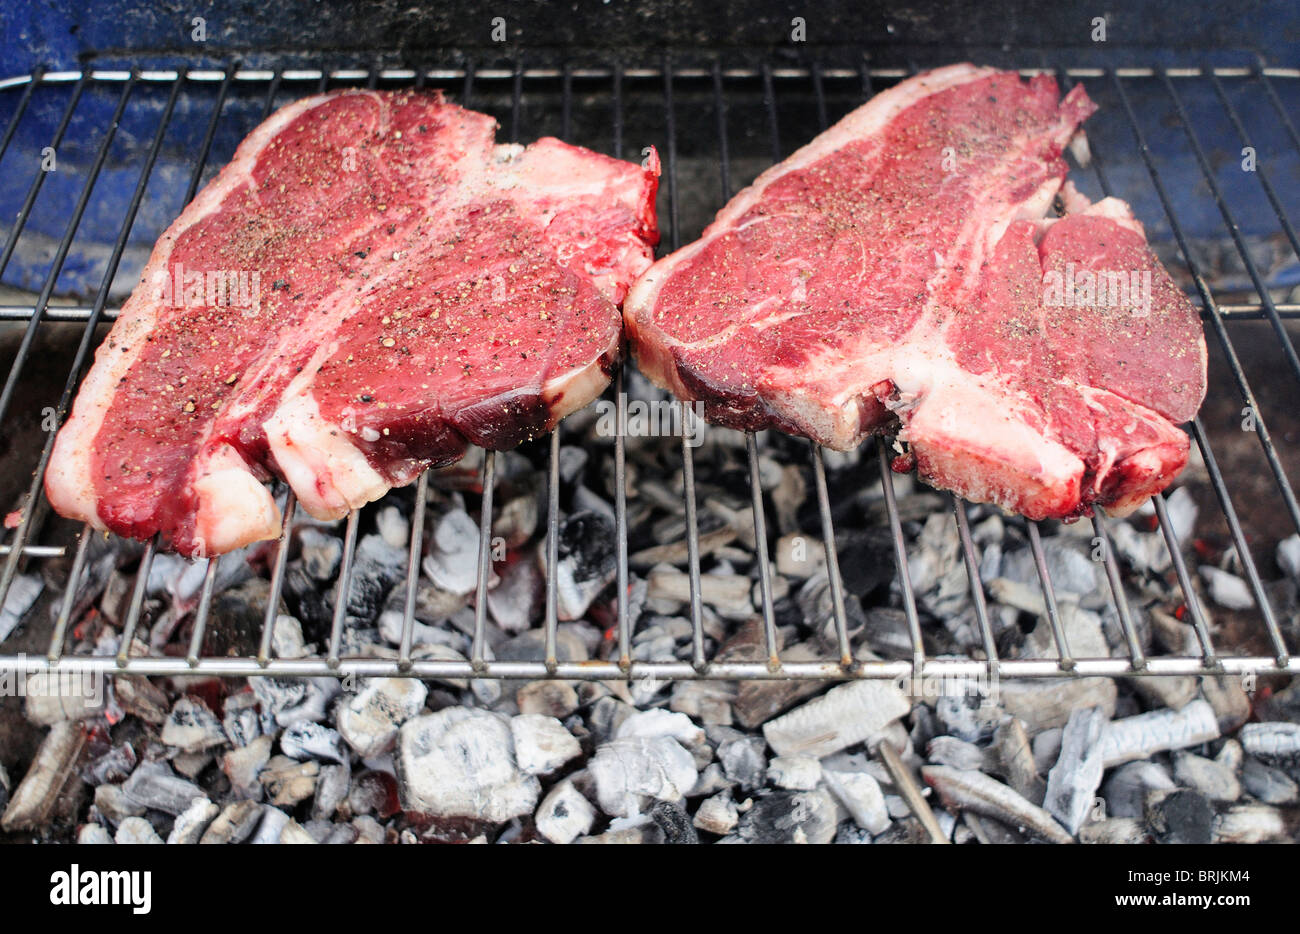 Uncooked T-bone steaks on barbecue grill Stock Photo